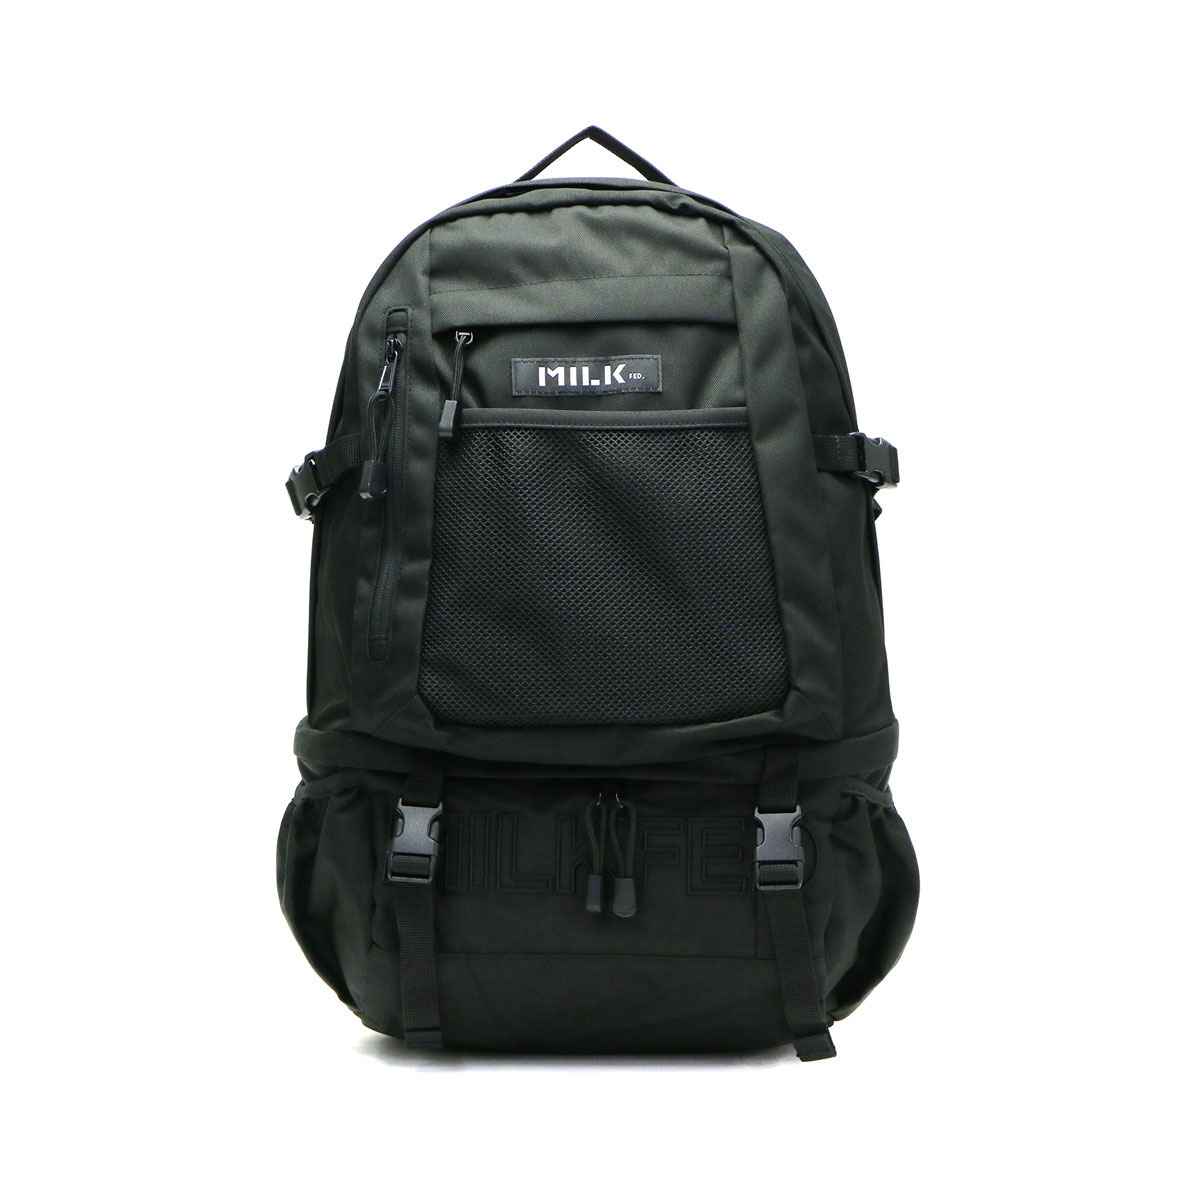 MILKFED. ミルクフェド EMBROIDERY BIG BACKPACK BAR バックパック 28L